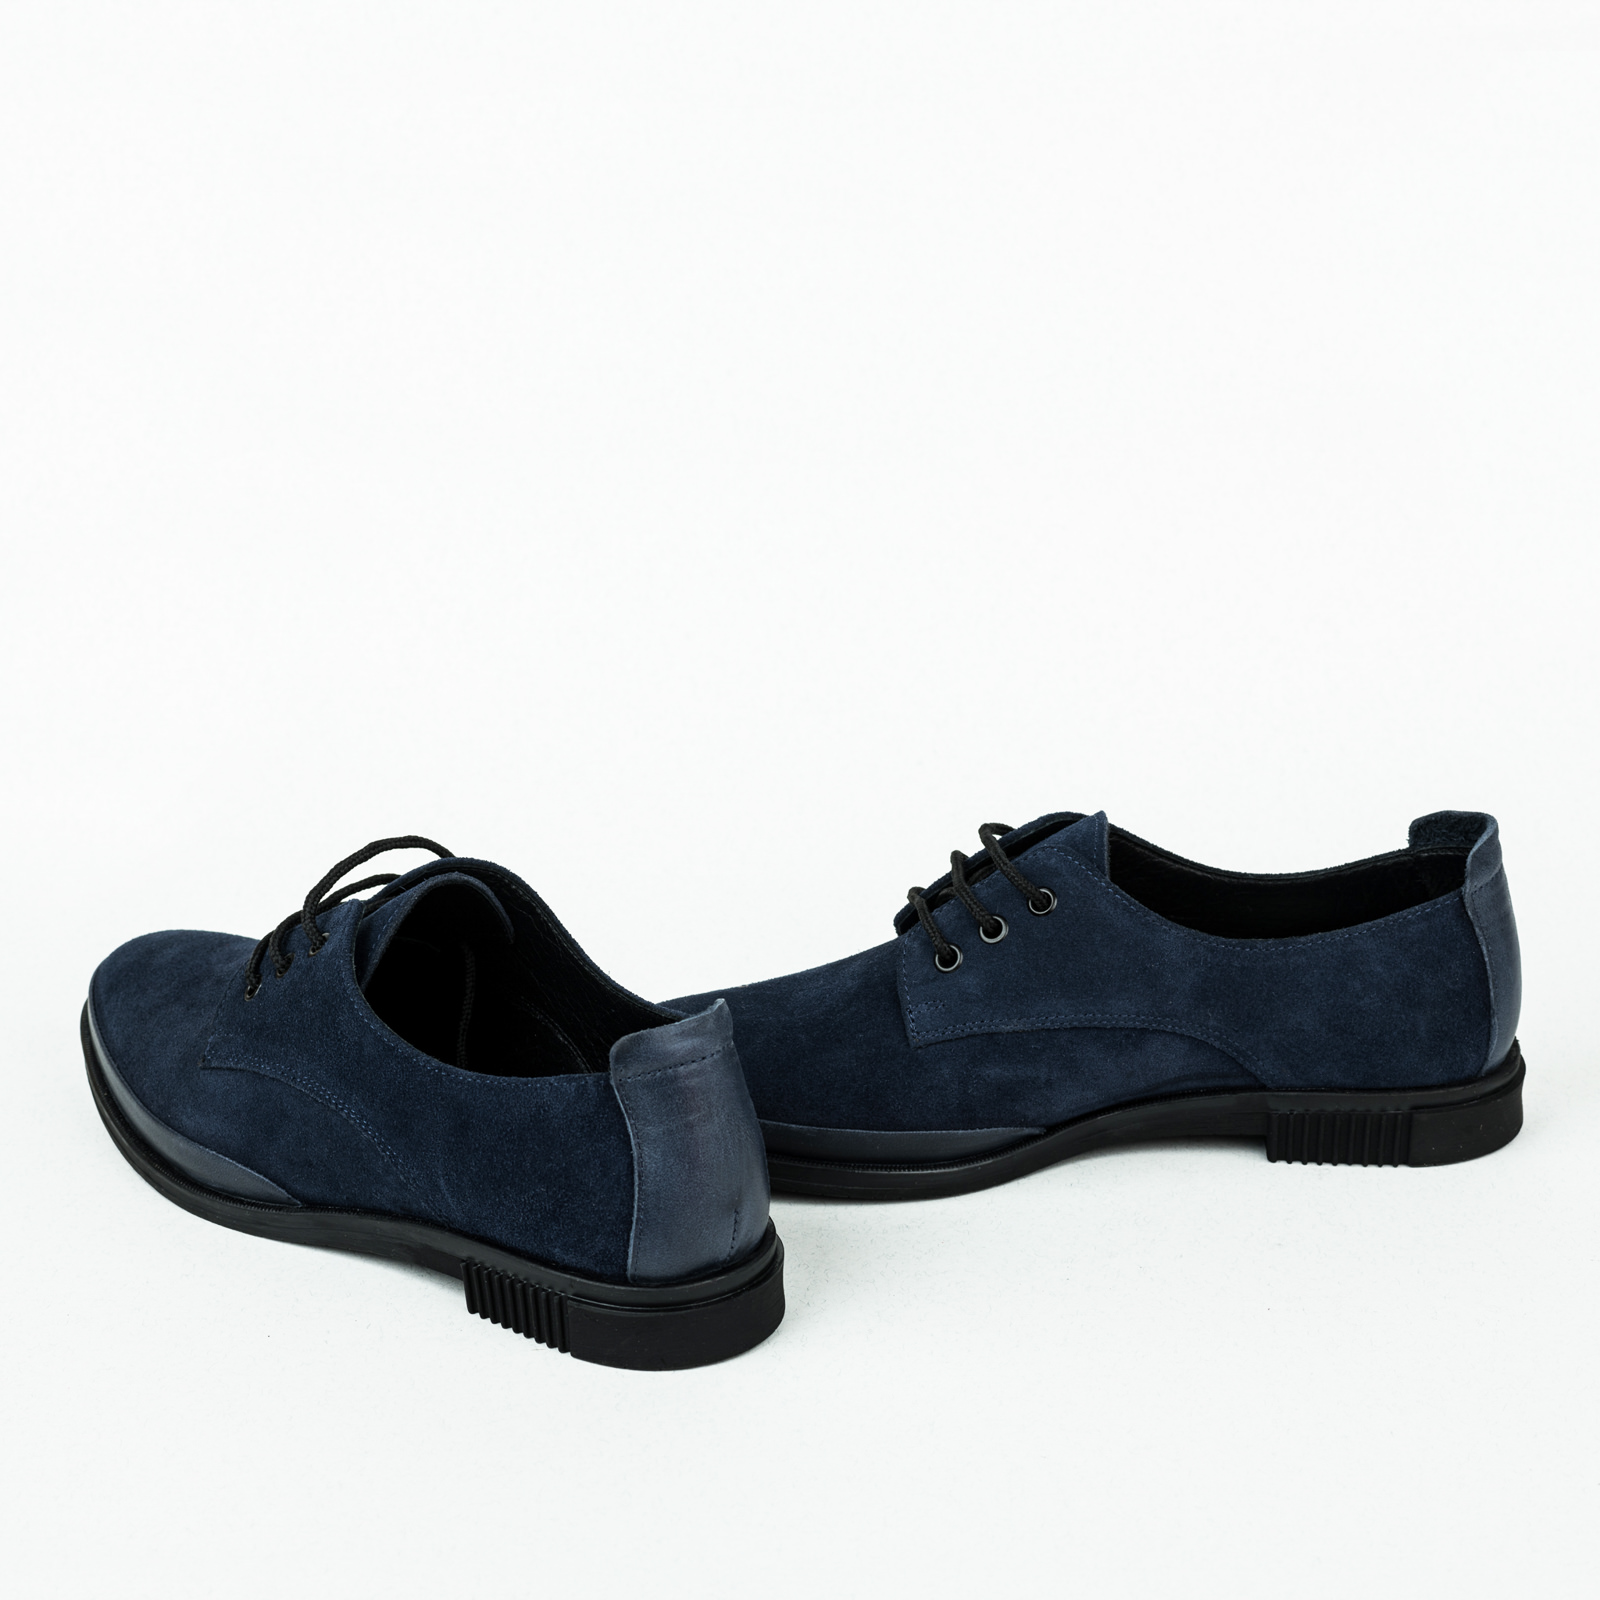 Leather shoes & flats B014 - NAVY